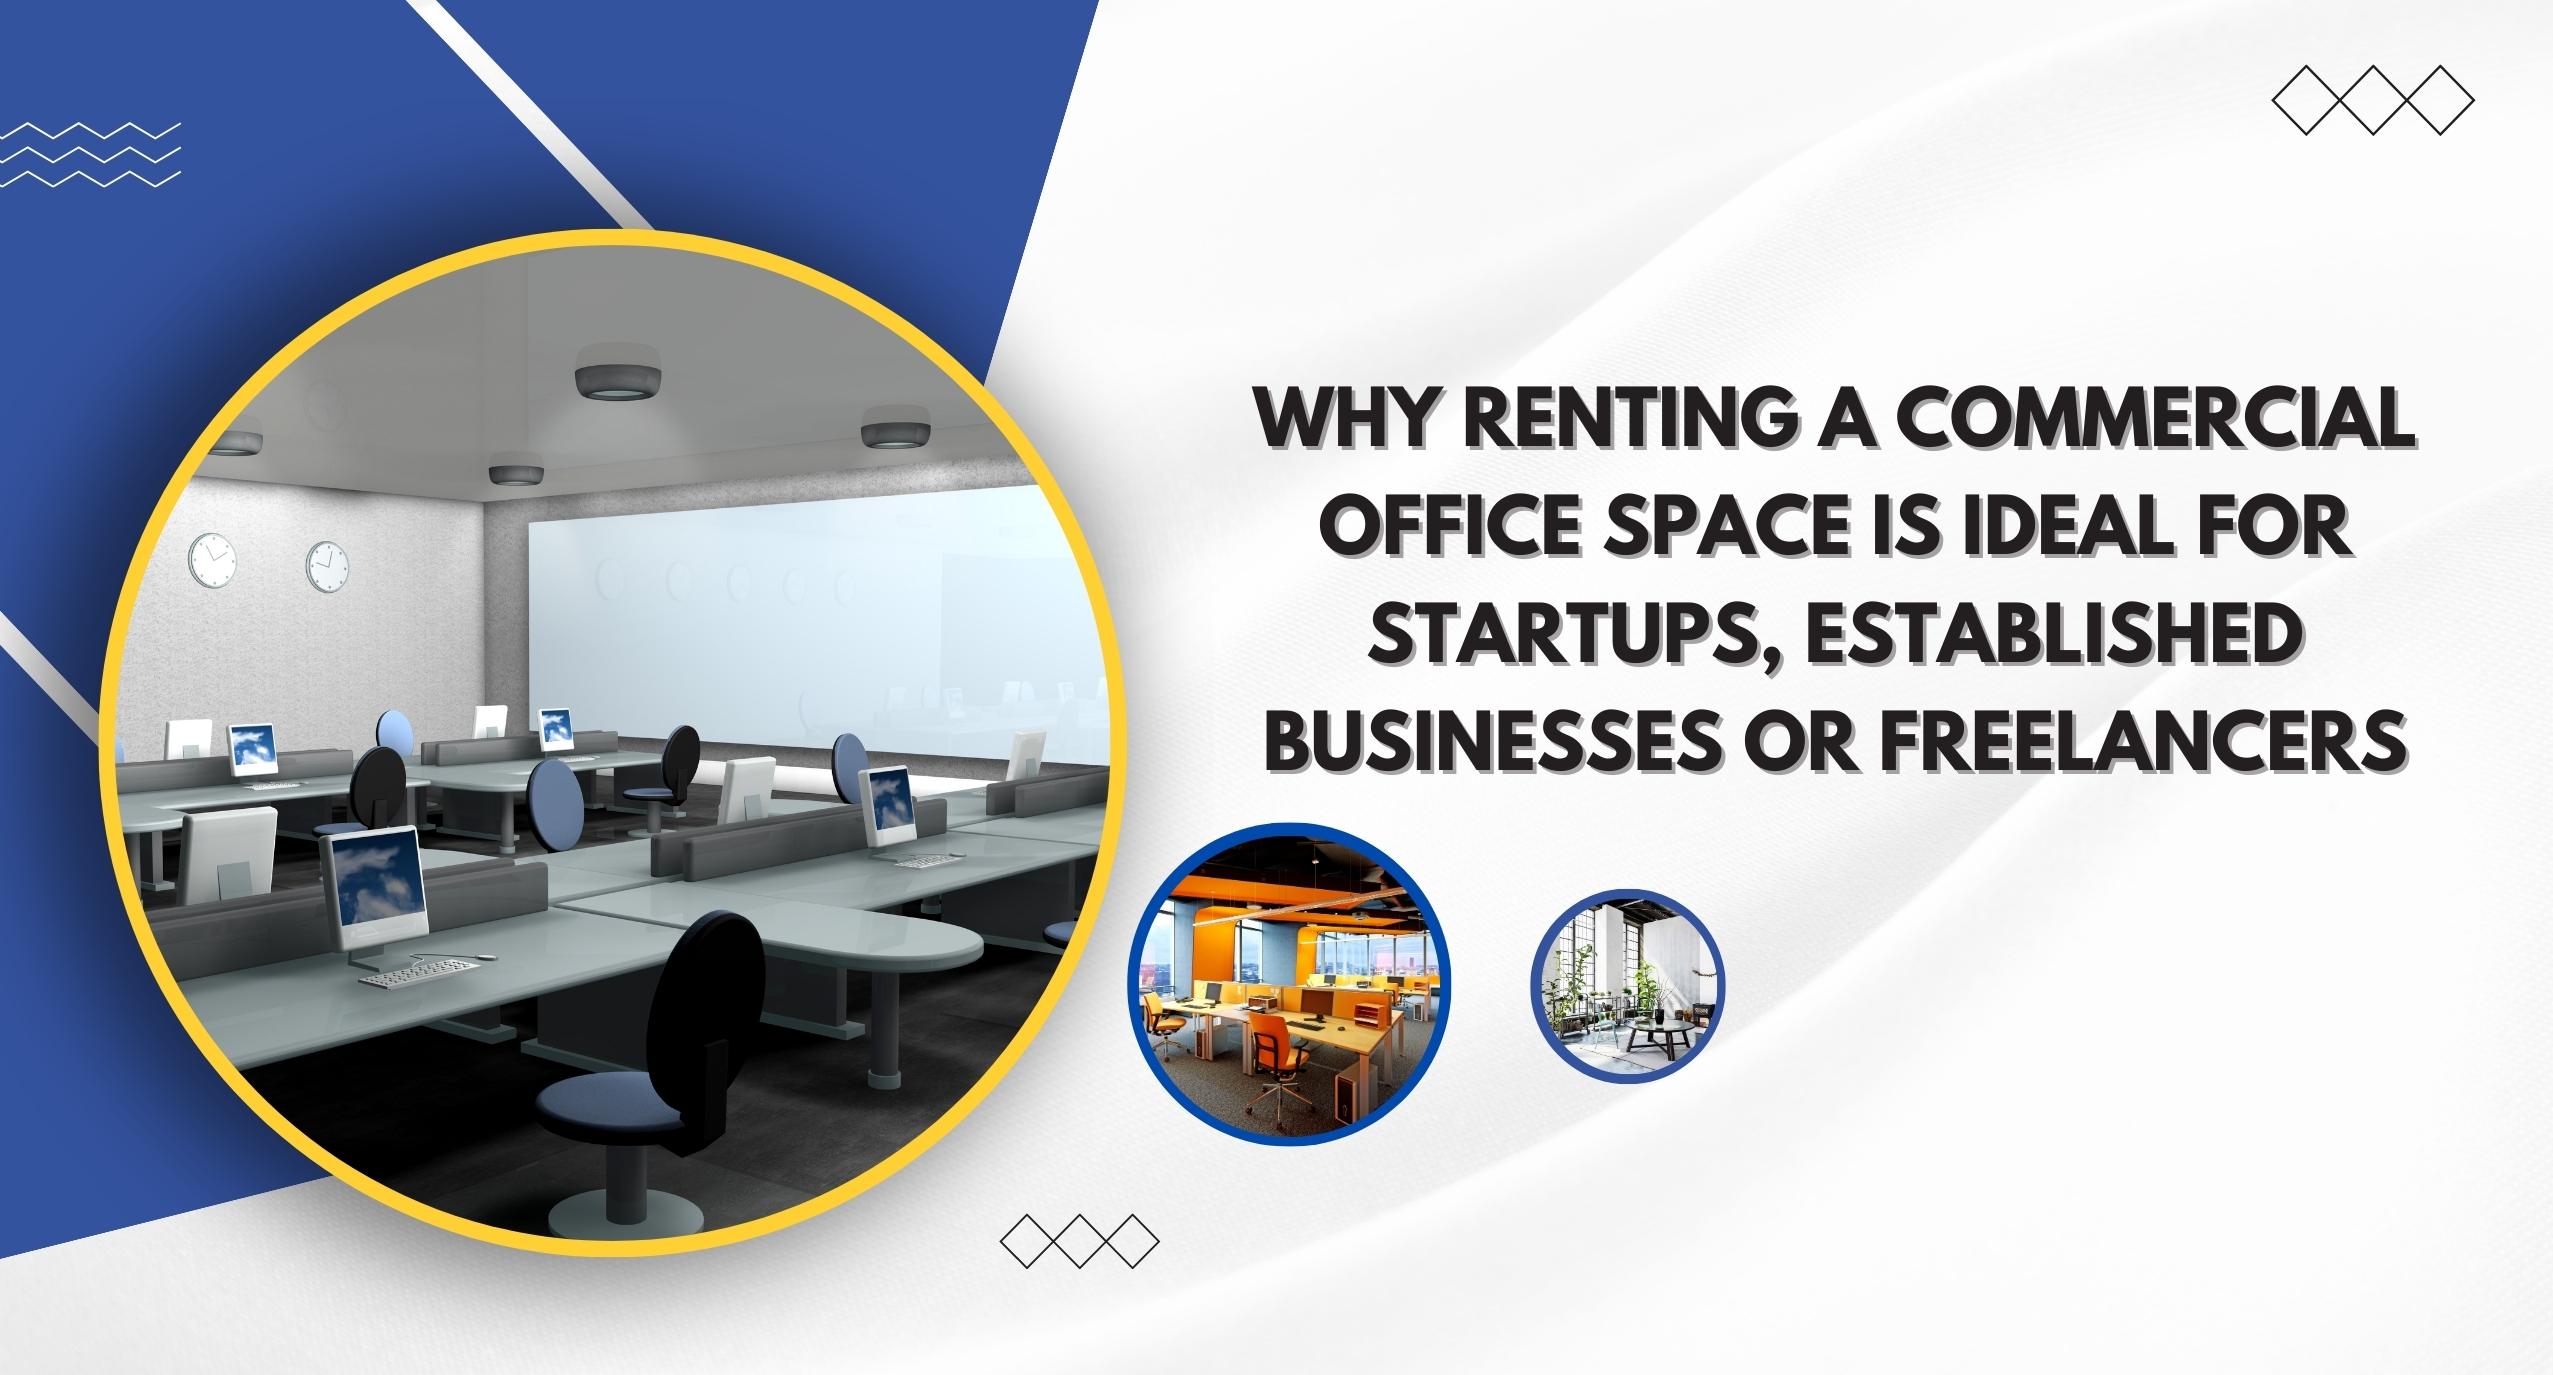 Commercial Office Space is Ideal for Startups, Established Businesses or Freelancers